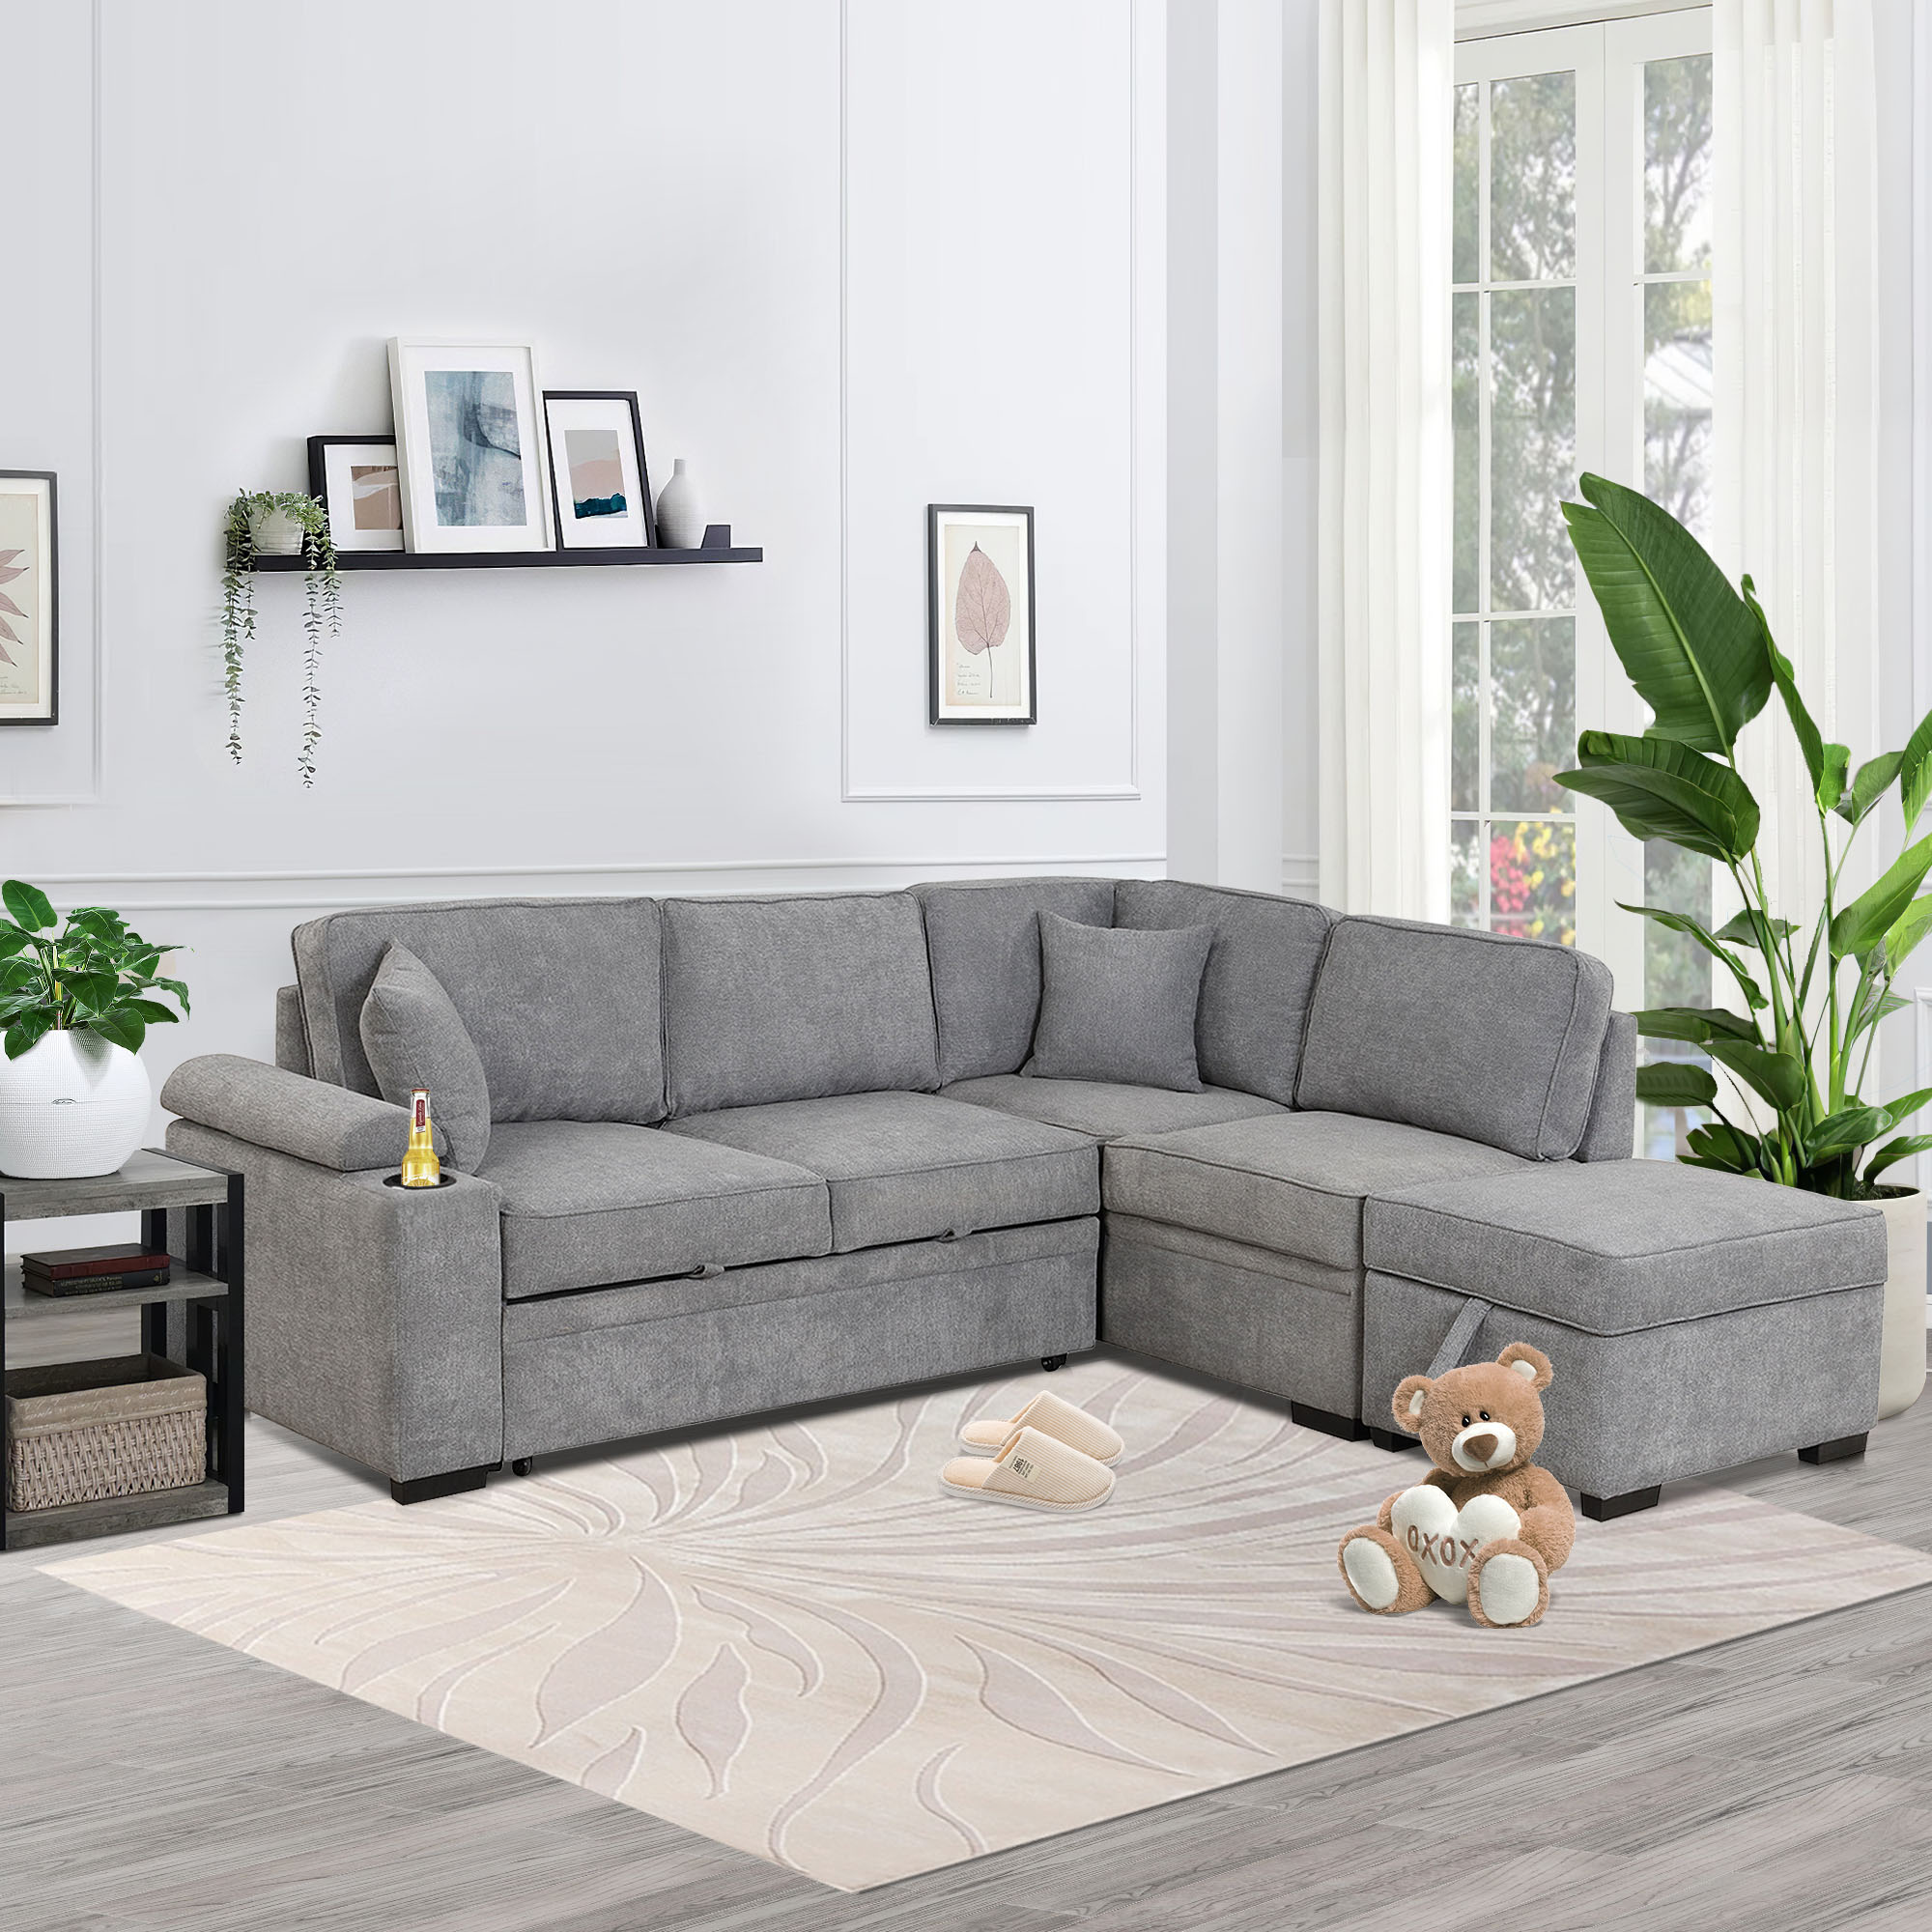 L-Shape Sleeper Pull Out Sofa Bed with Storage Ottoman - SG000550AAE